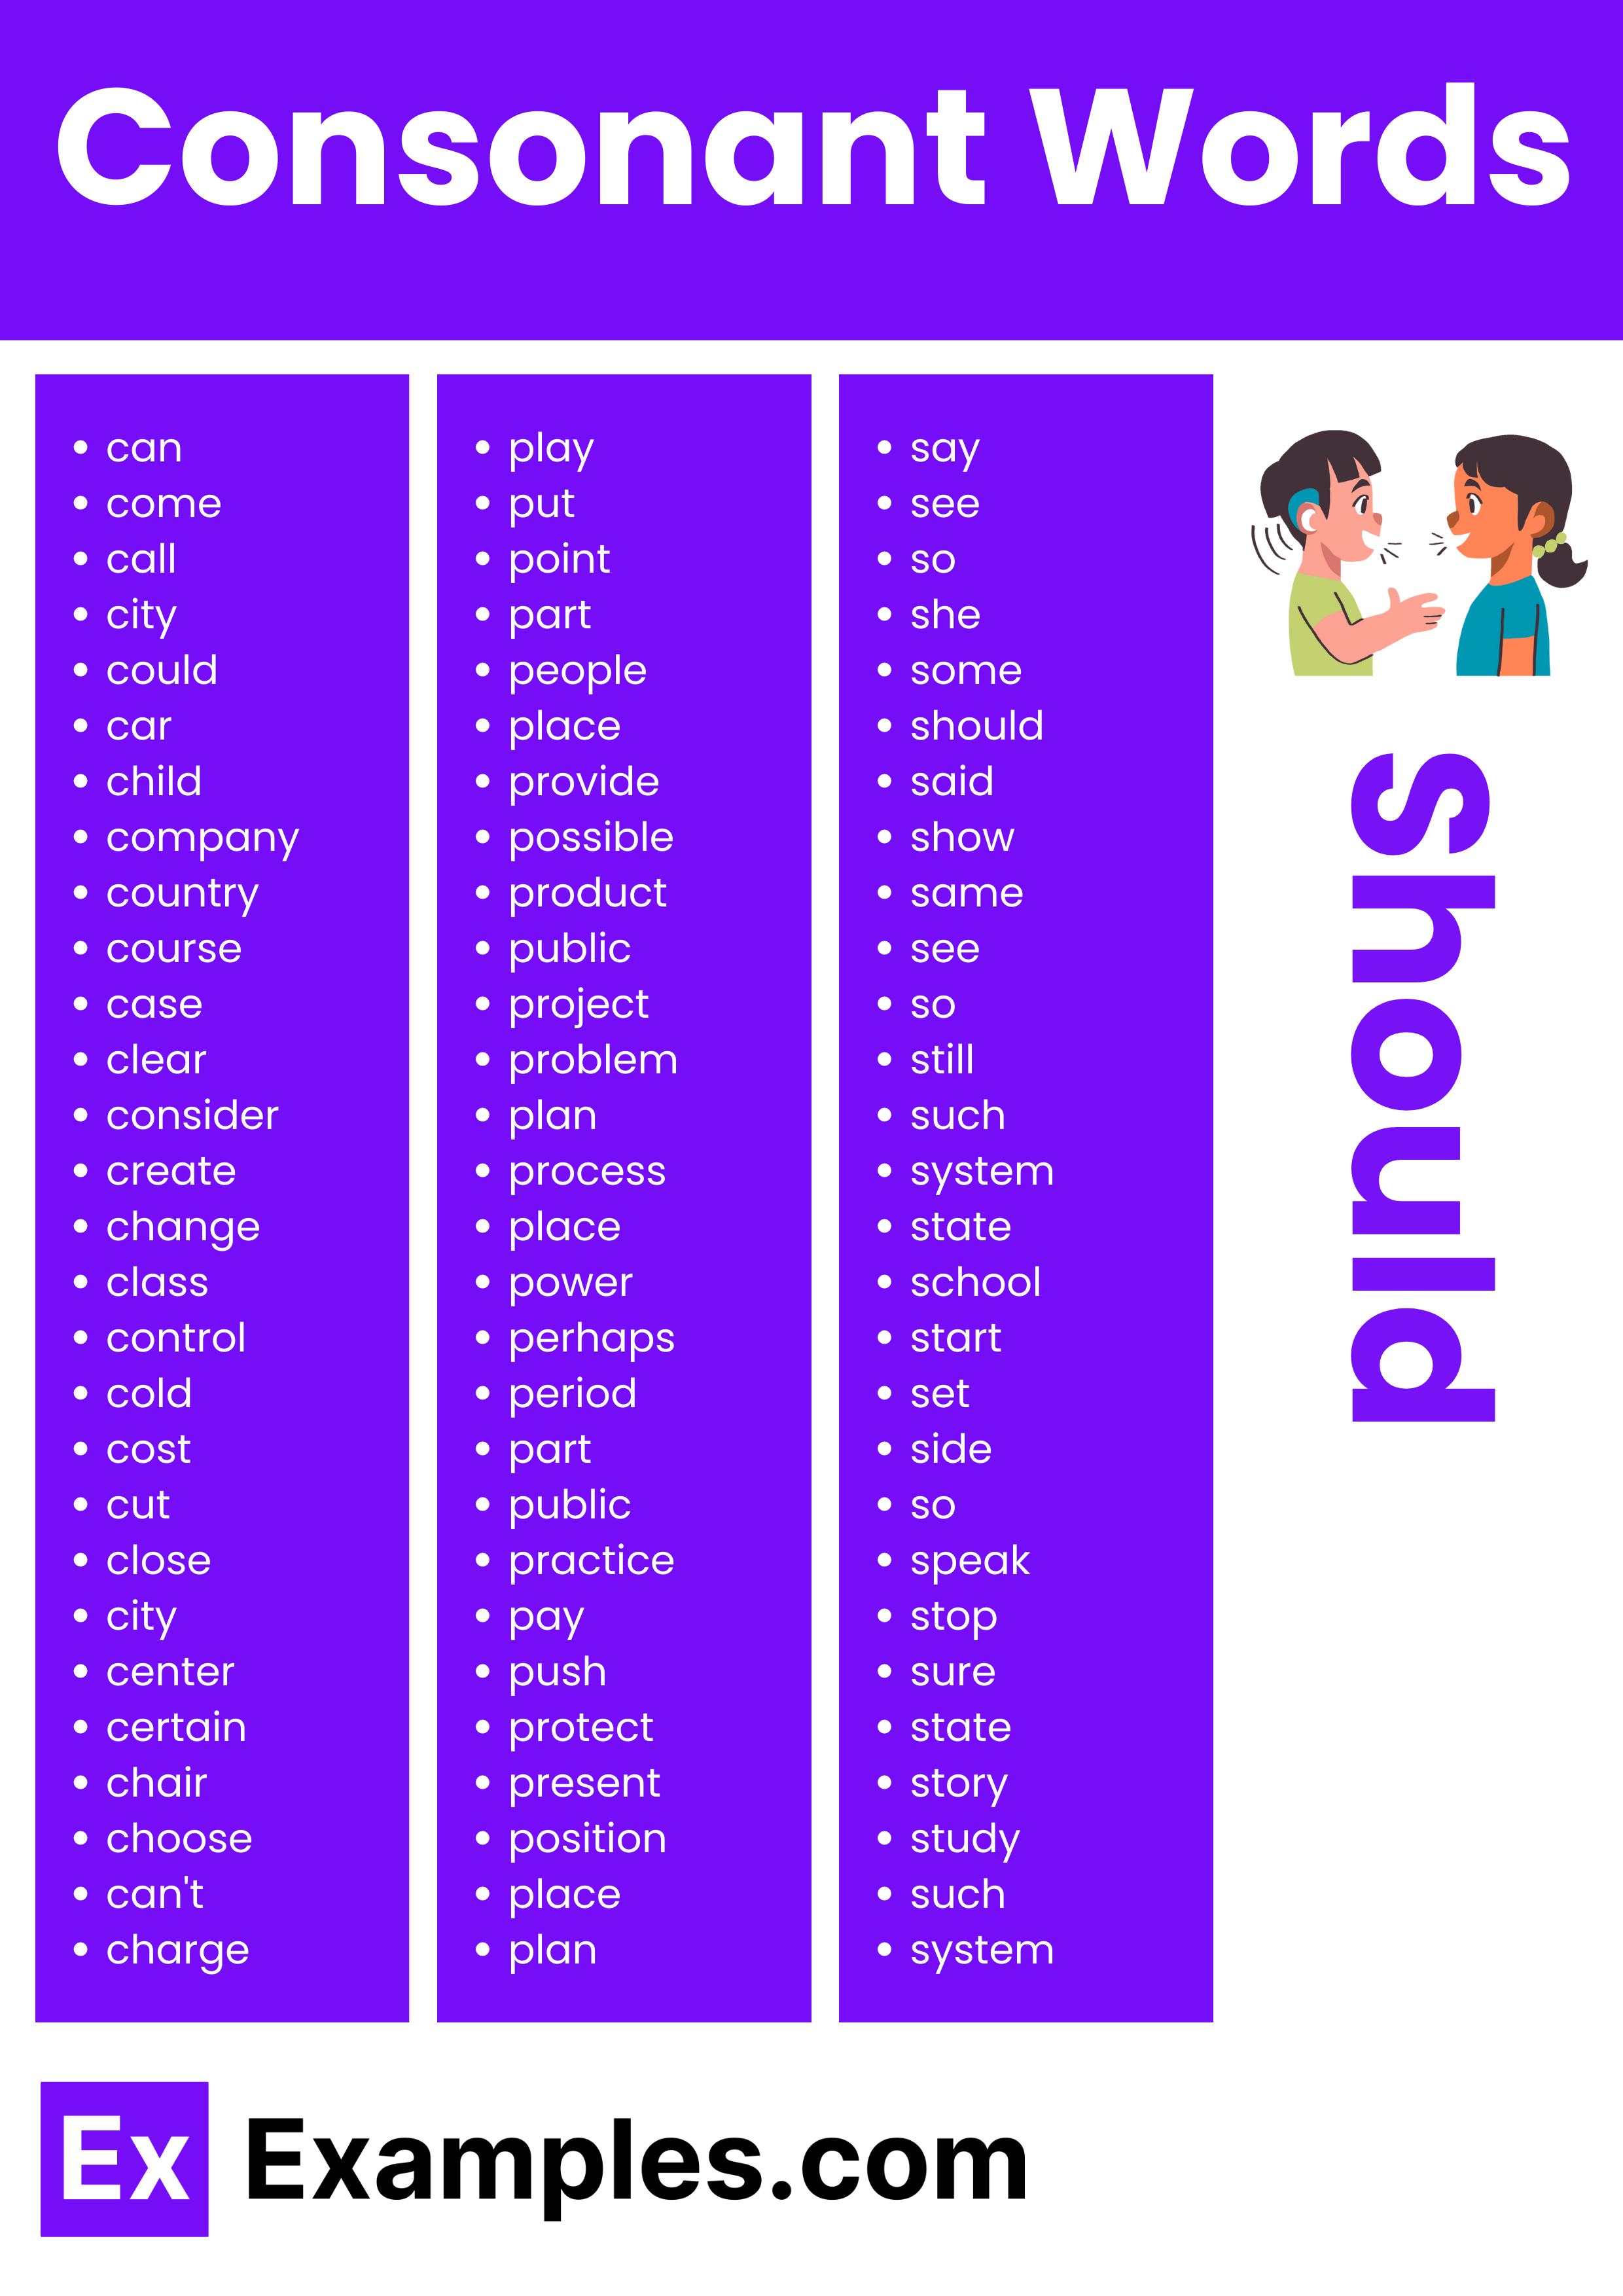 commonly used consonant words